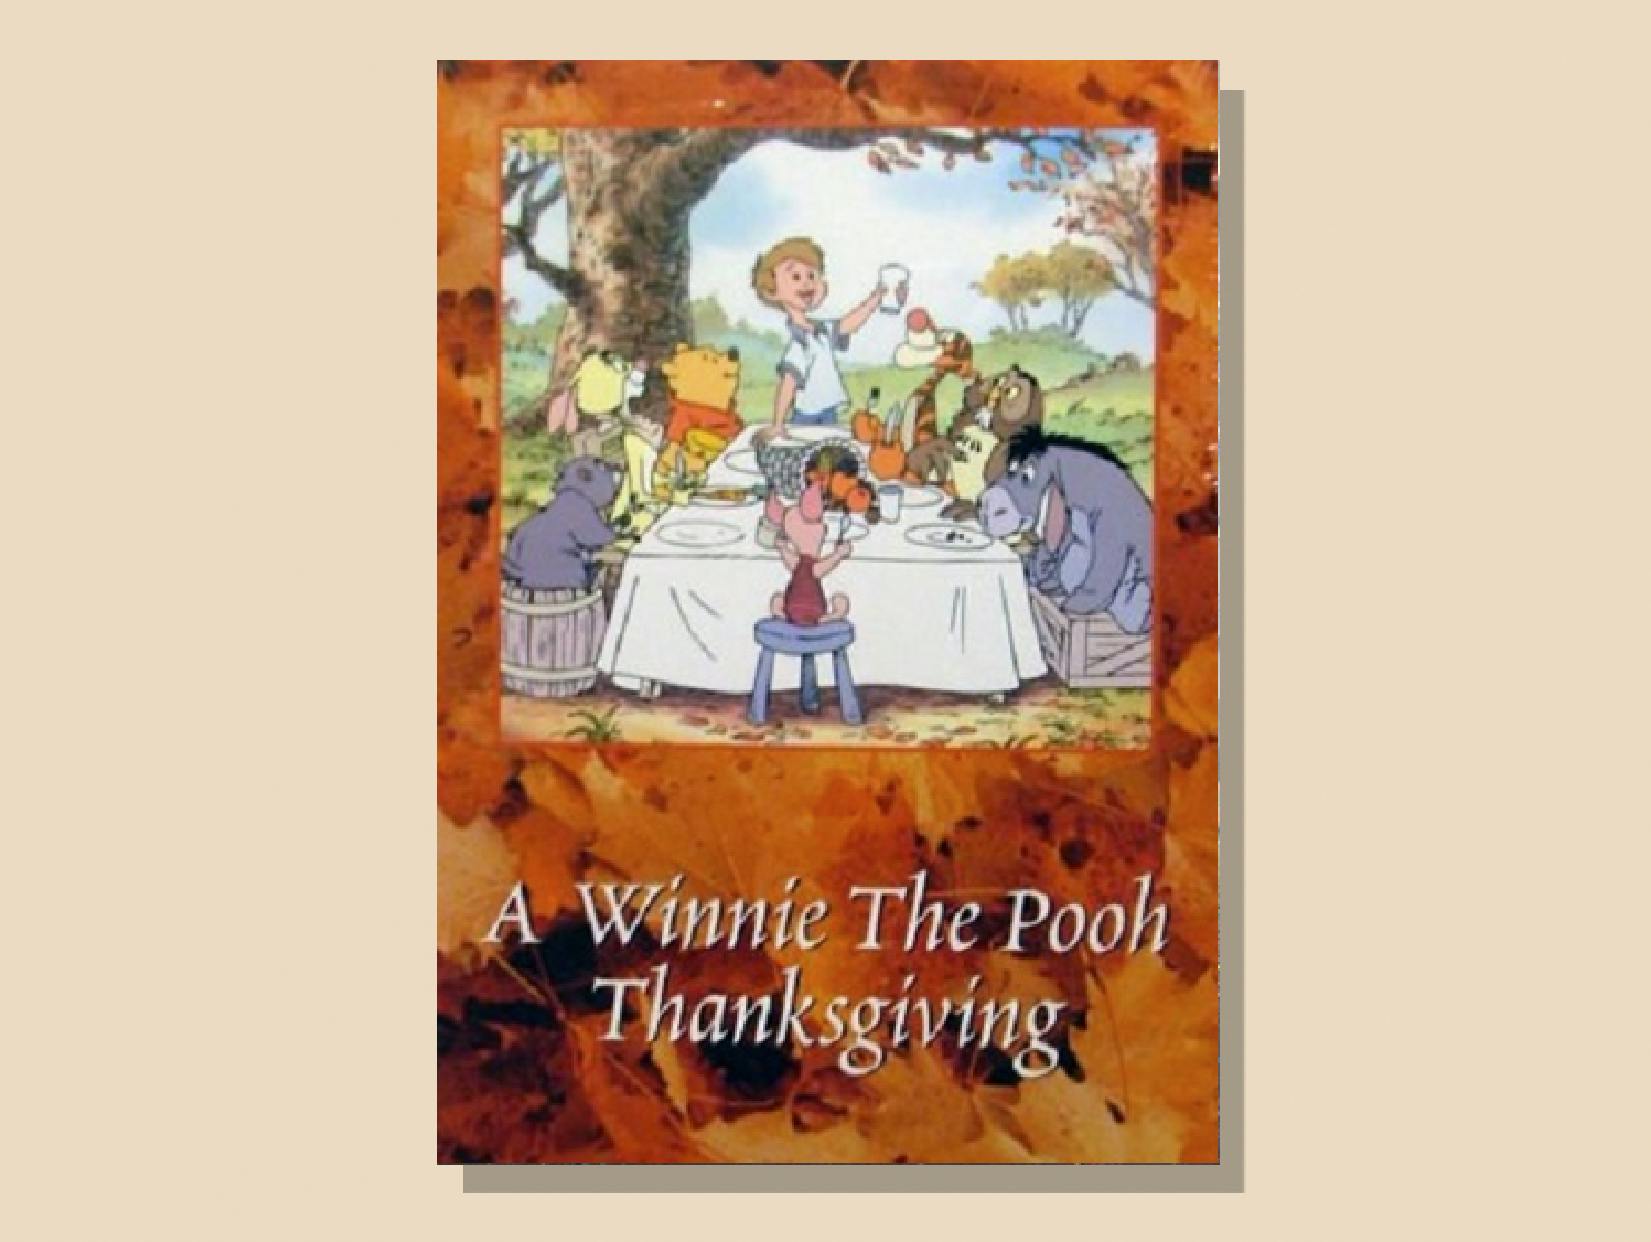 A Winnie the Pooh Thanksgiving, one of the best kids thanksgiving movies